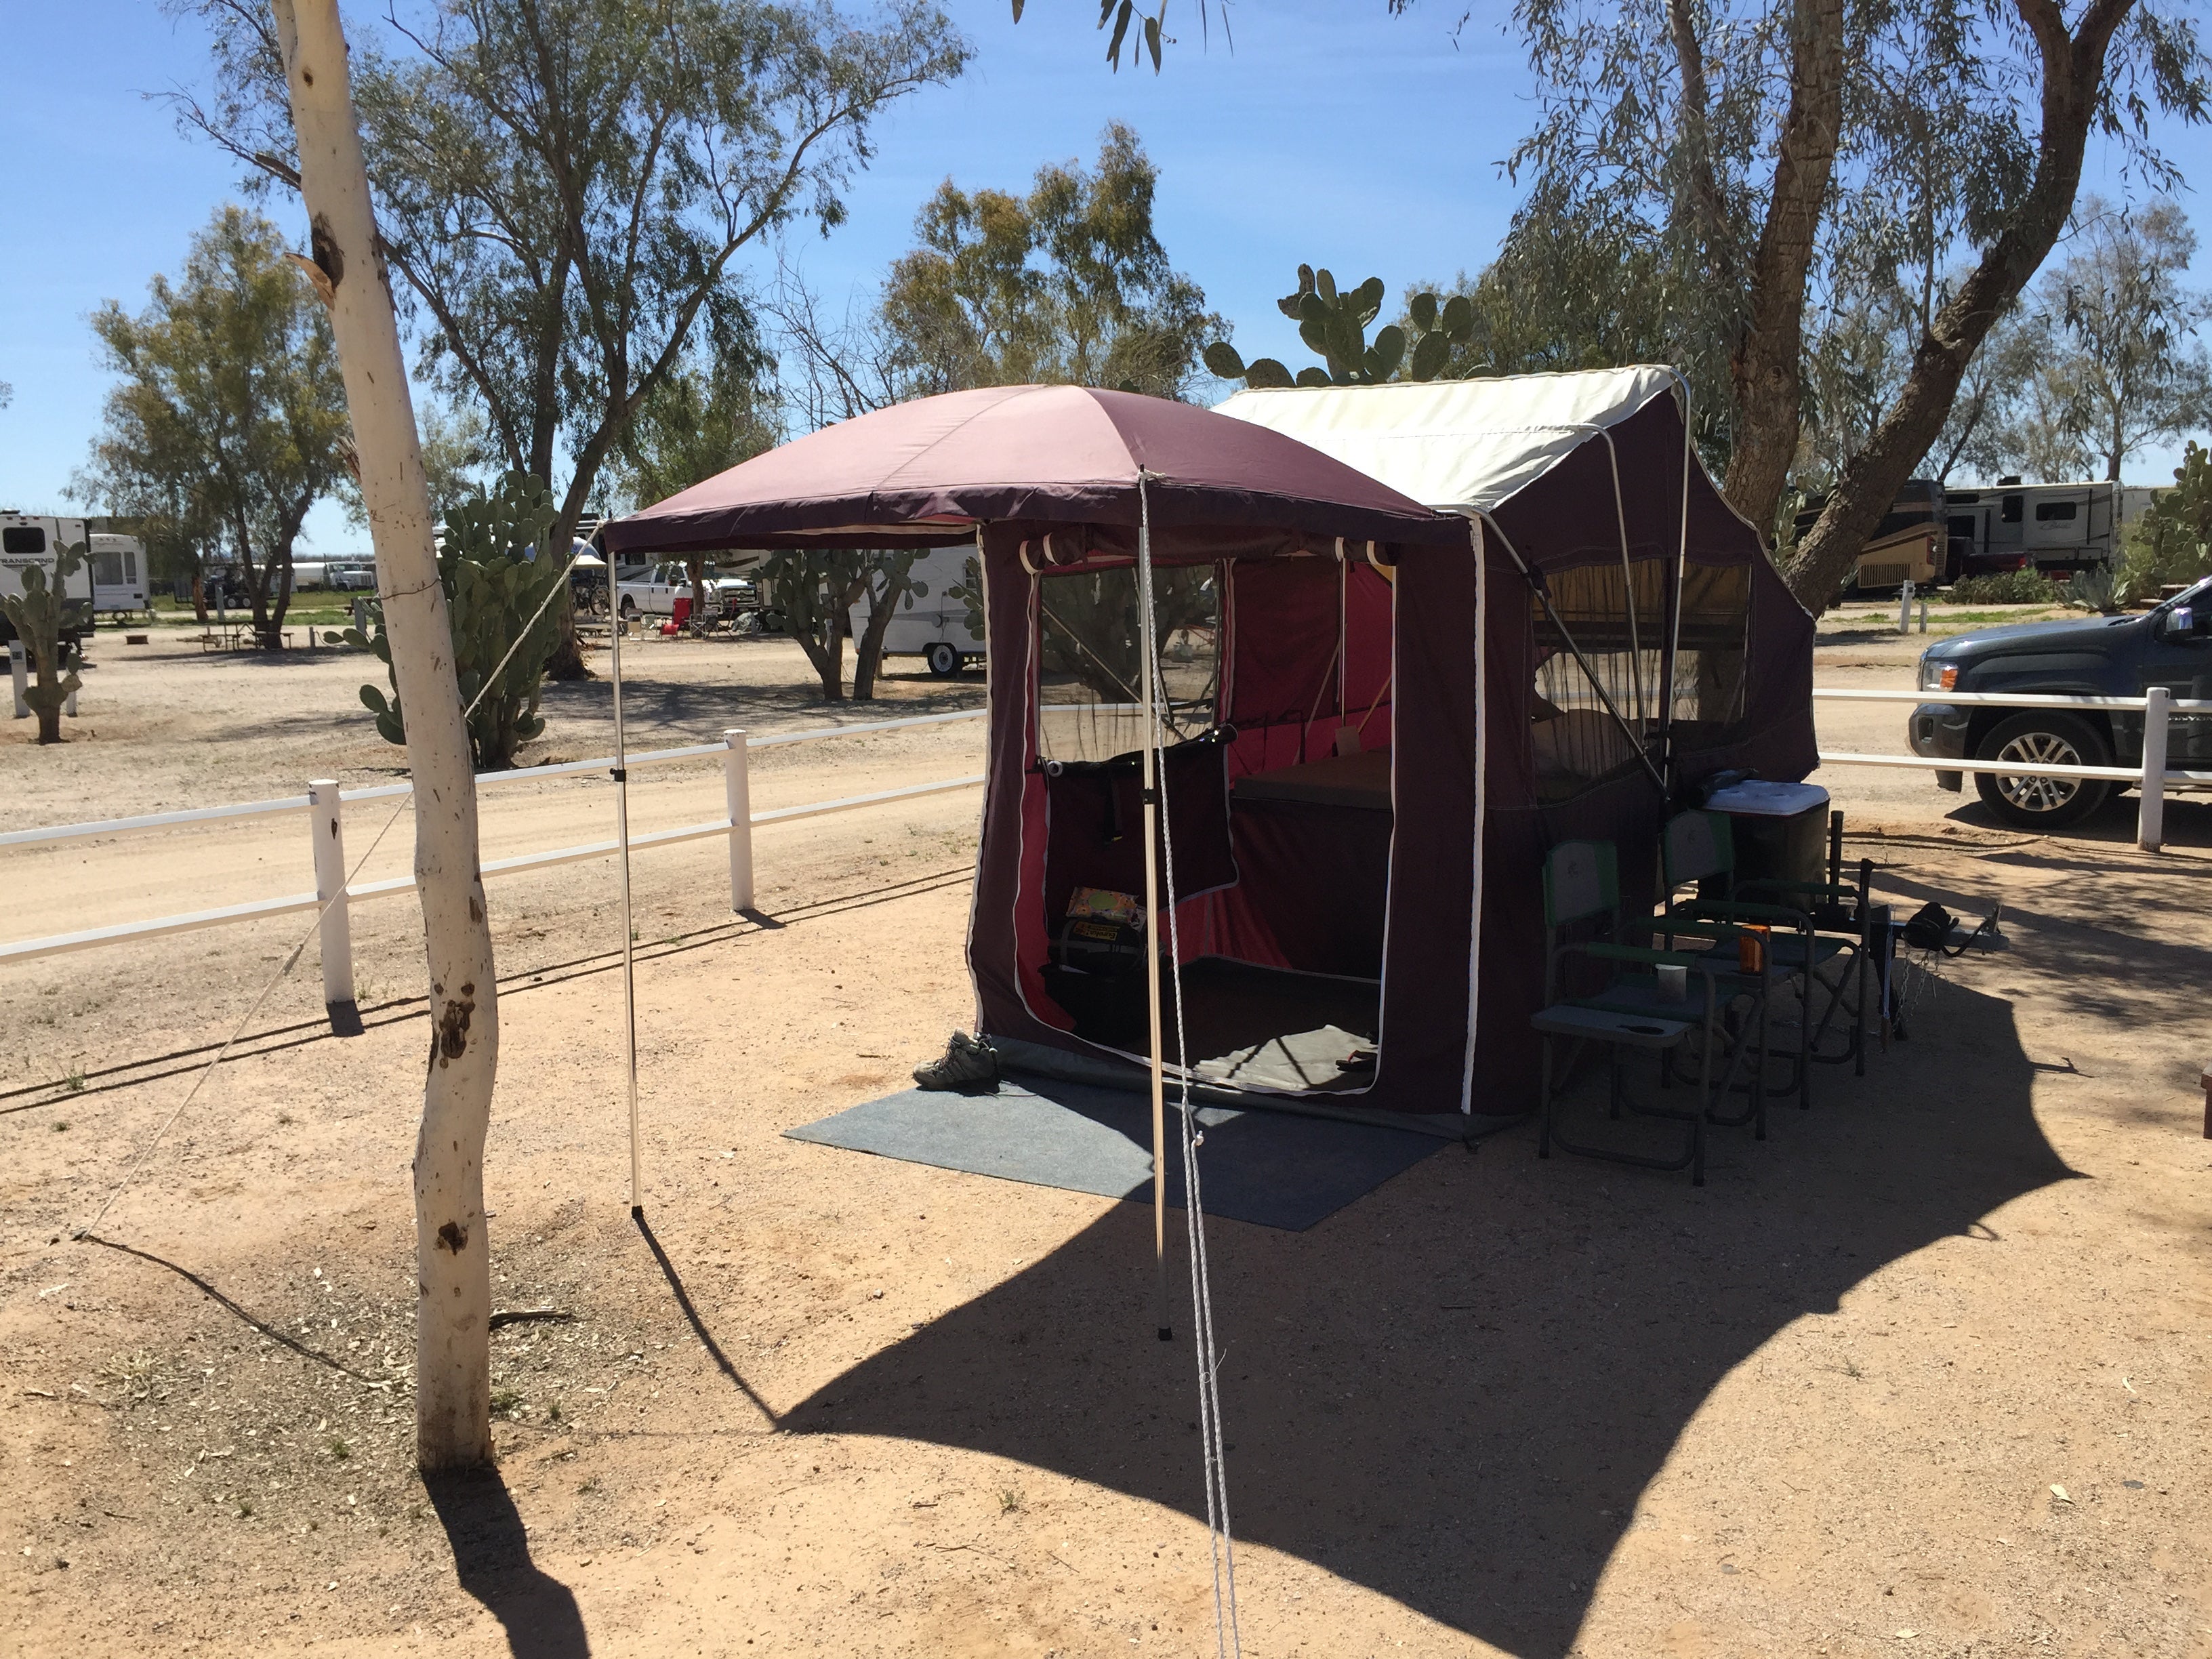 Camper submitted image from Picacho-Tucson NW KOA - 4